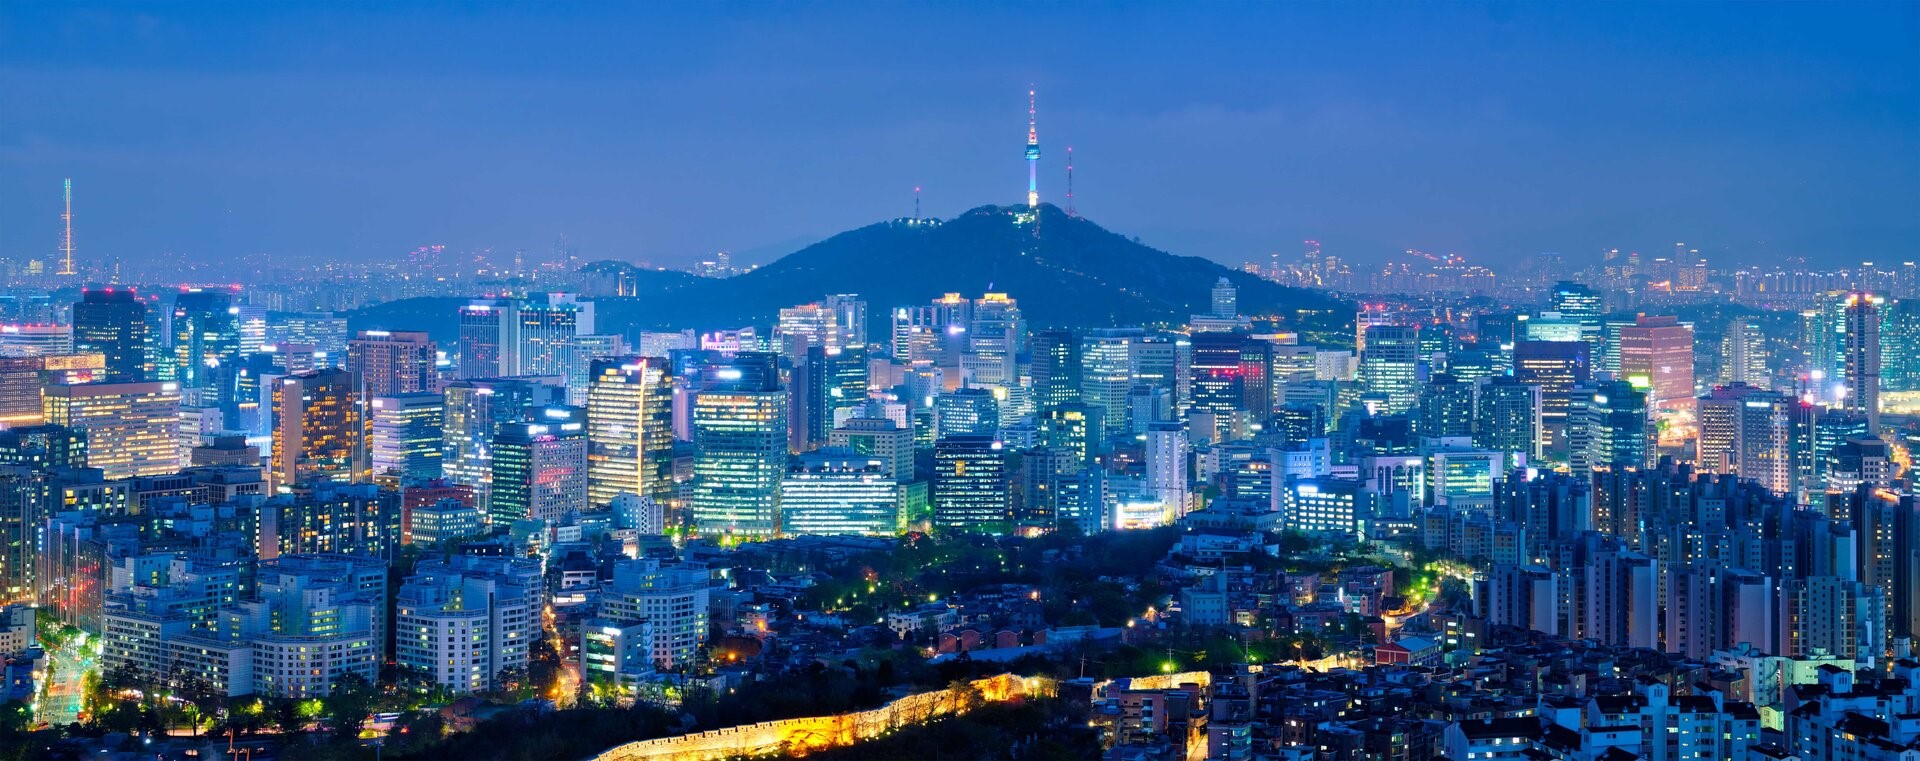 View of City of Seoul skyline at nighttime